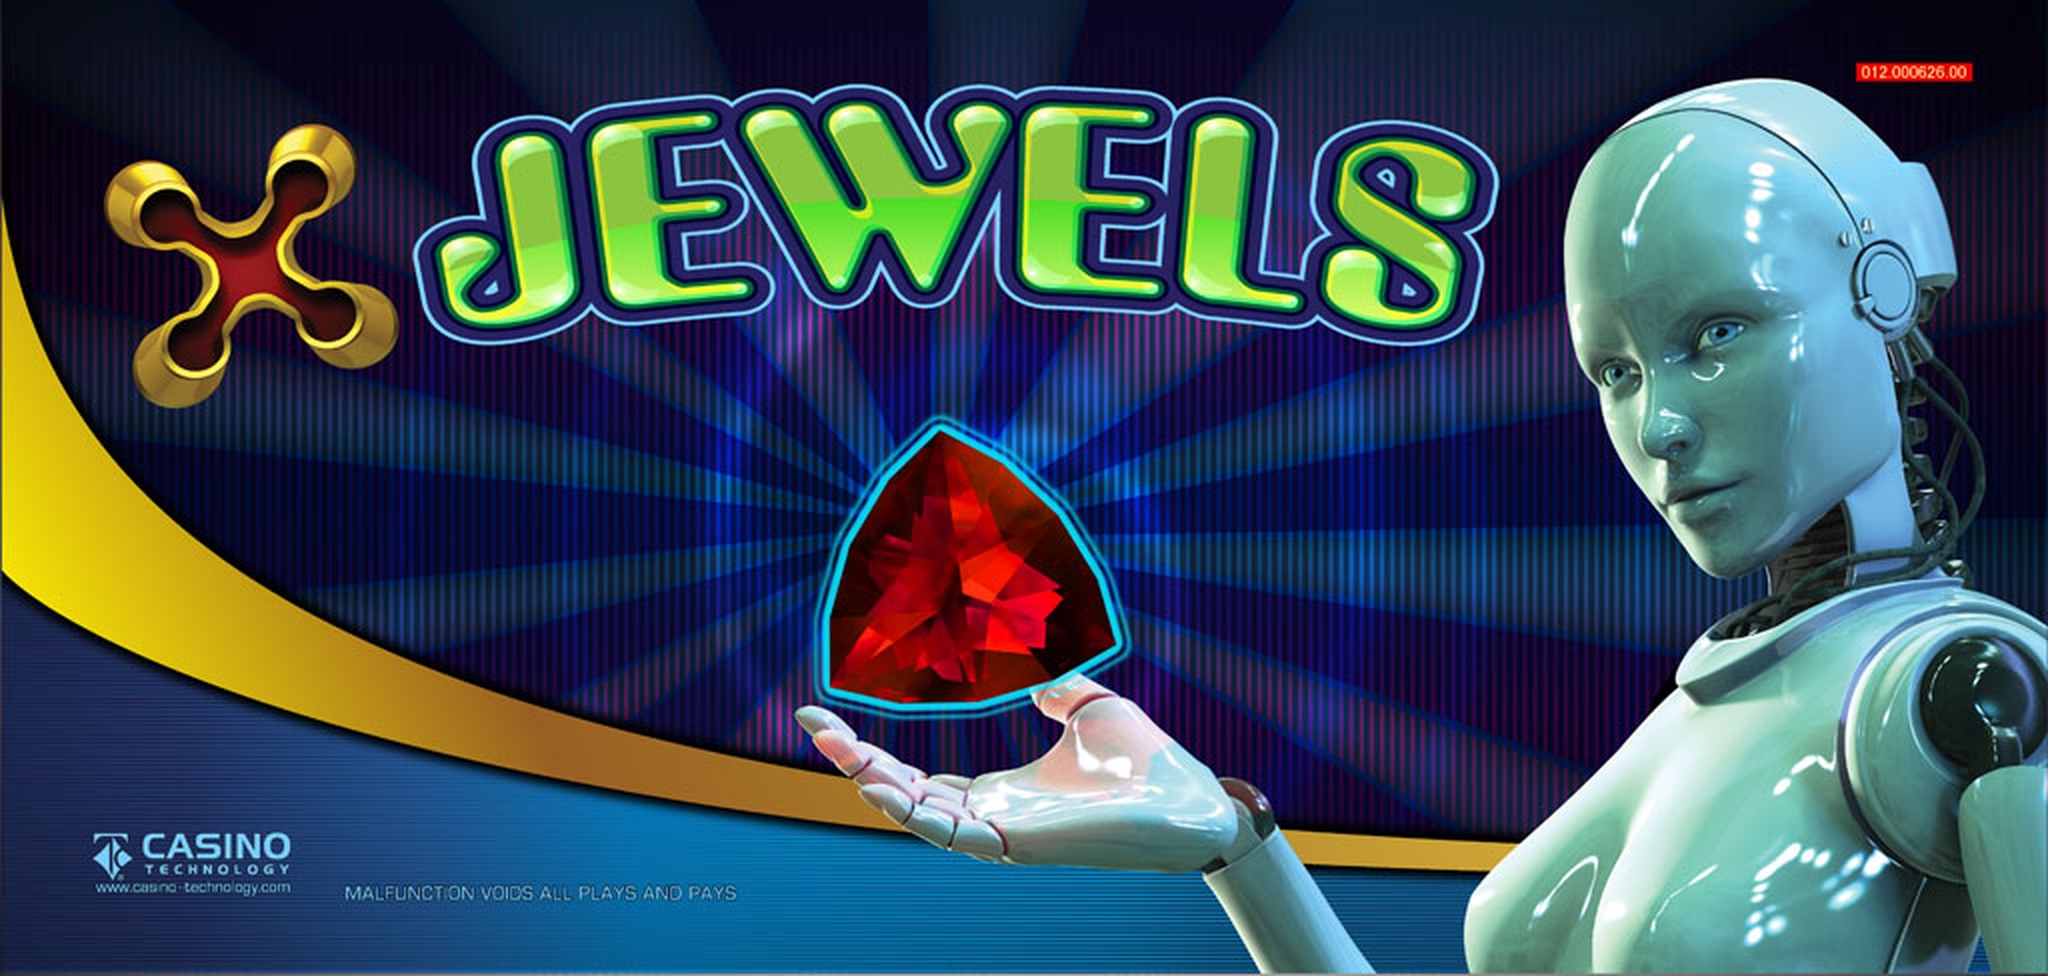 The X-Jewels Online Slot Demo Game by casino technology